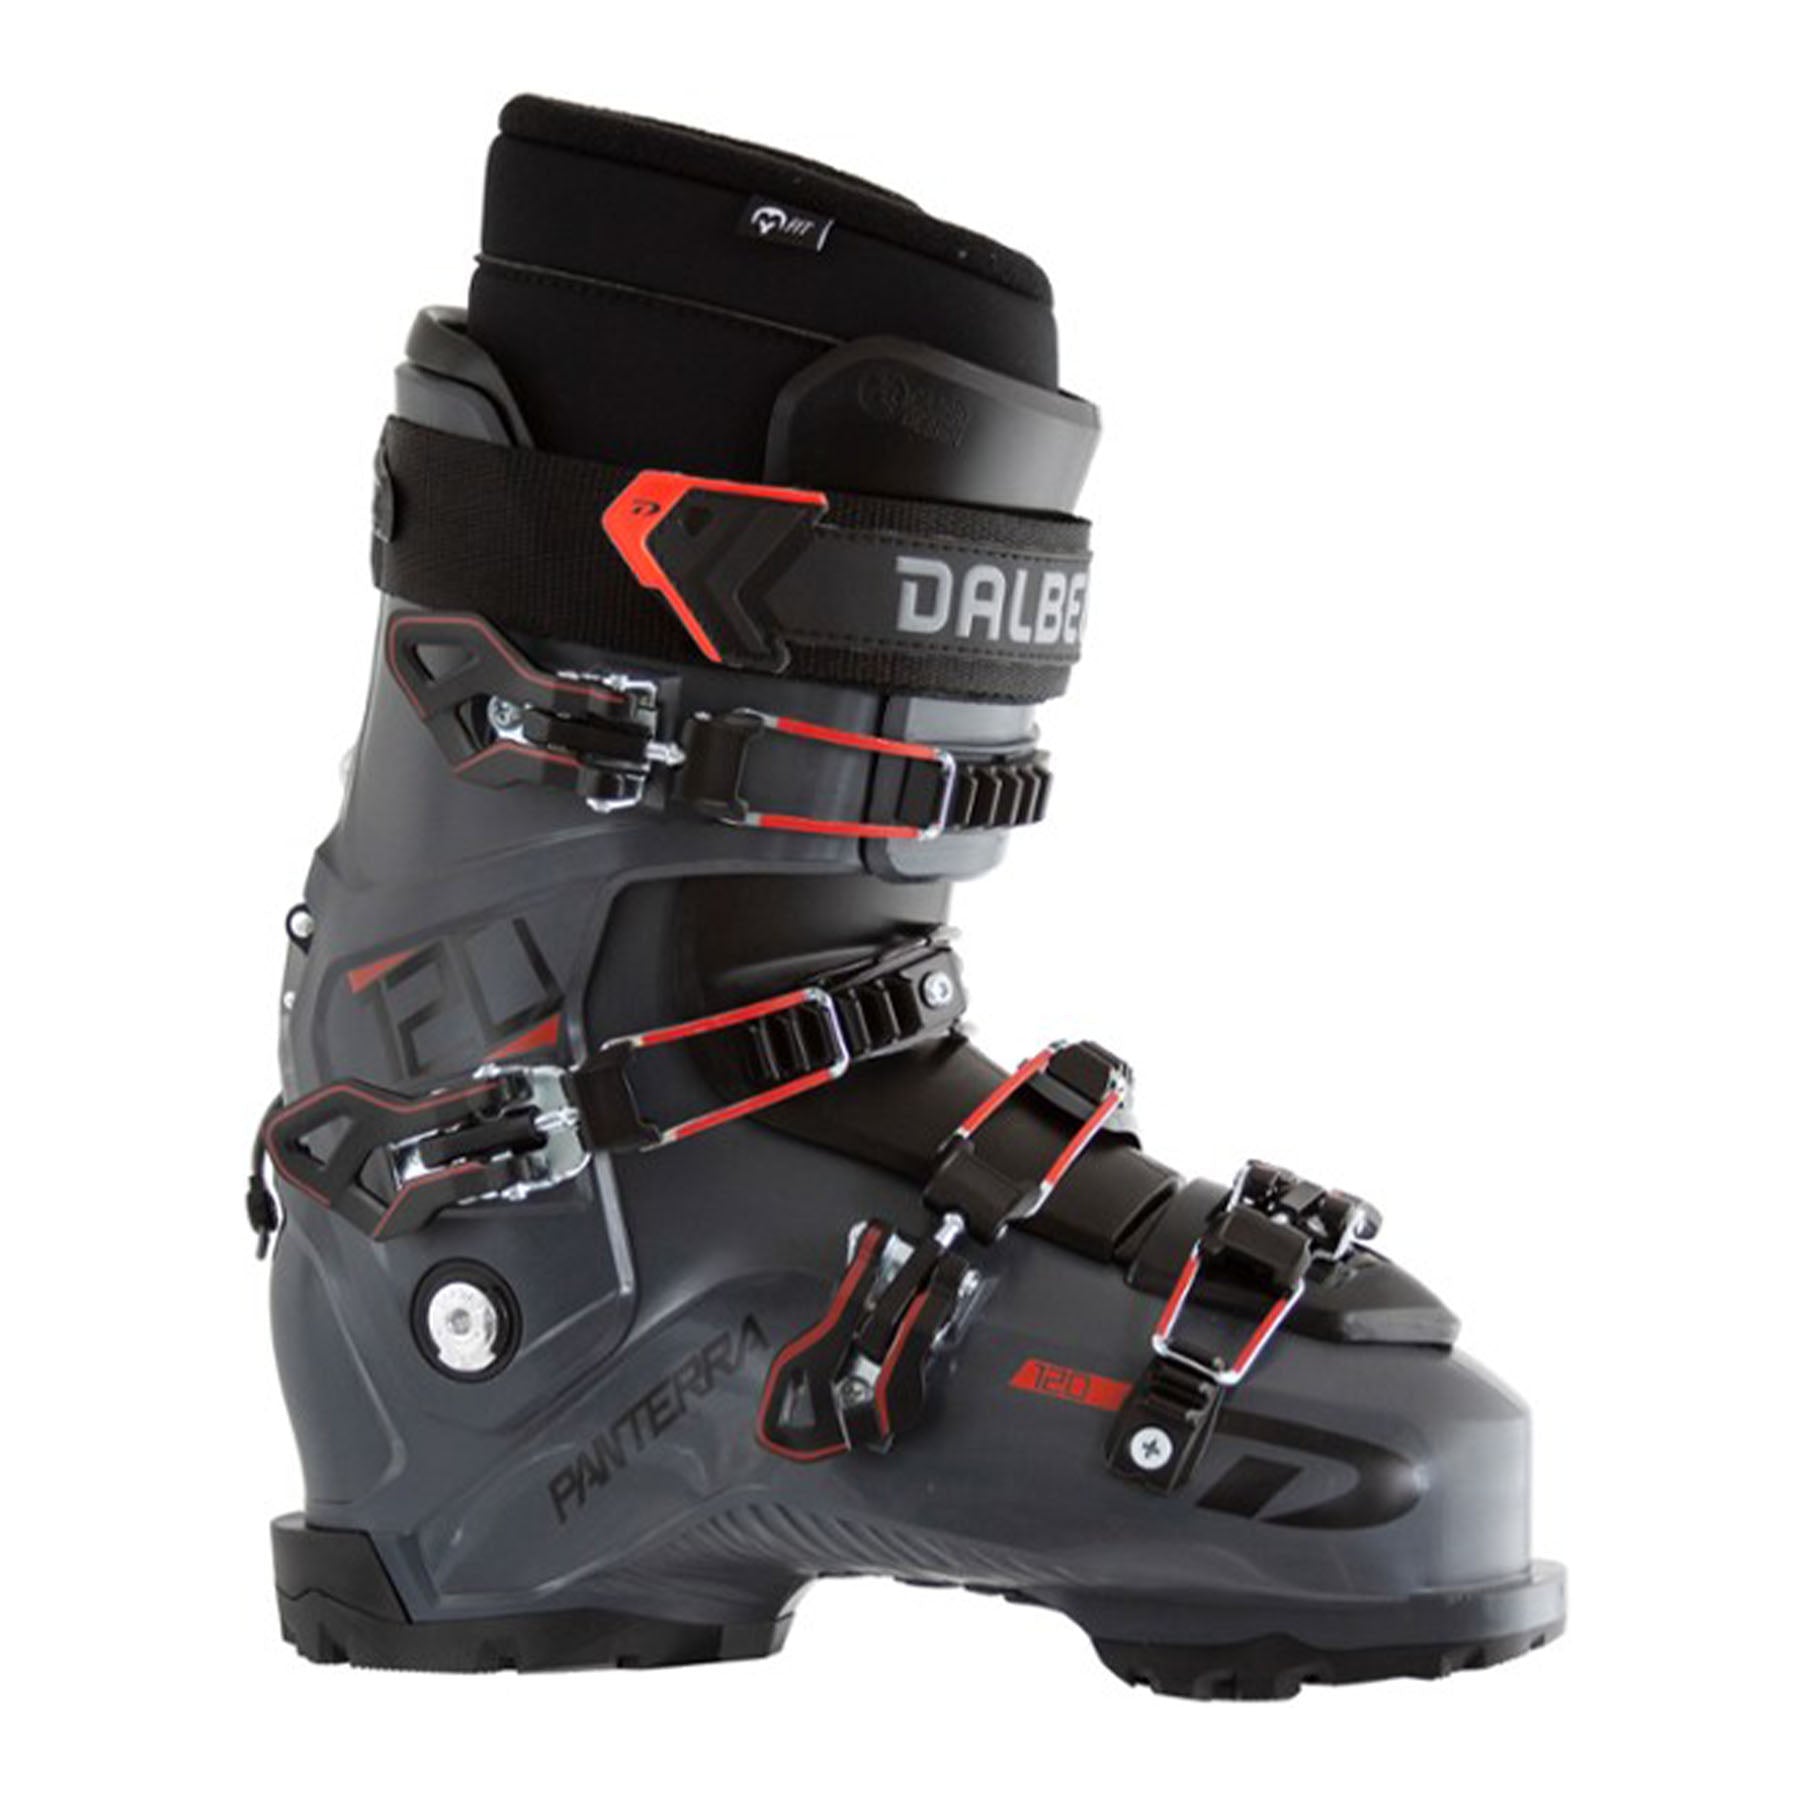 Hero image featuring a side angle shot of the Dalbello Panterra 120 GW ski boot in black with red trim.